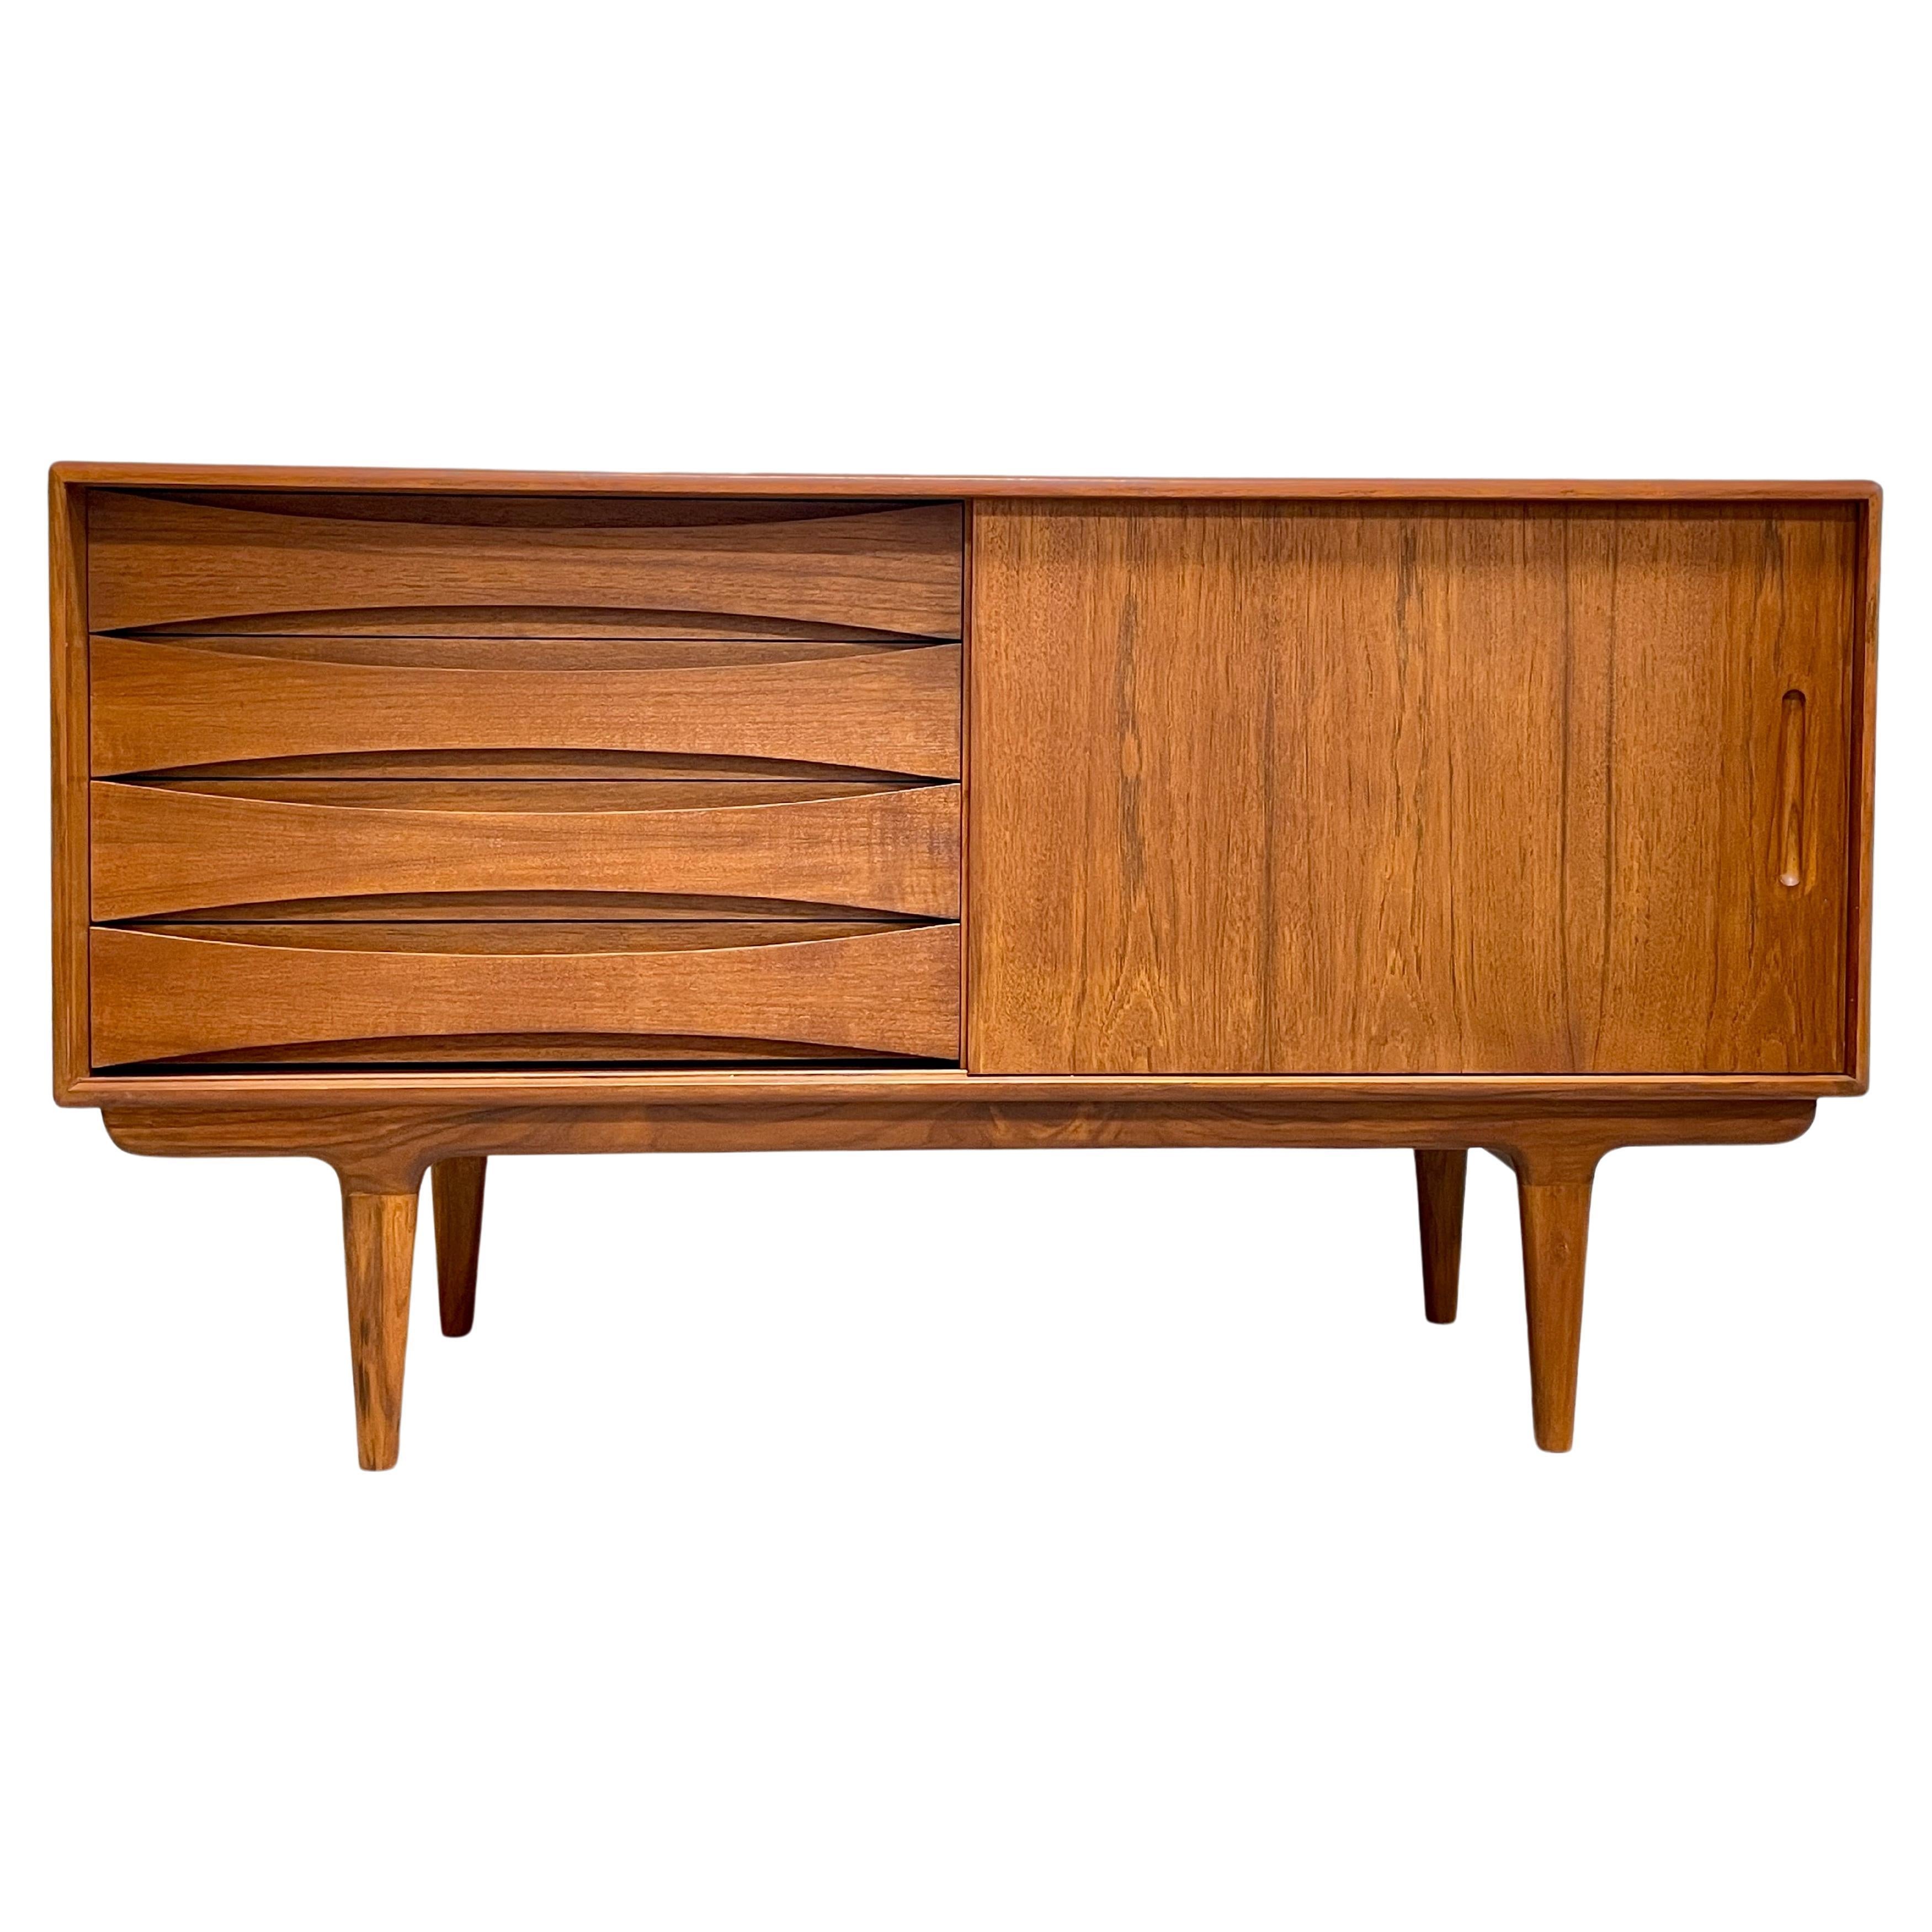 Apartment Sized Mid-Century Modern Styled Teak Credenza / Media Stand